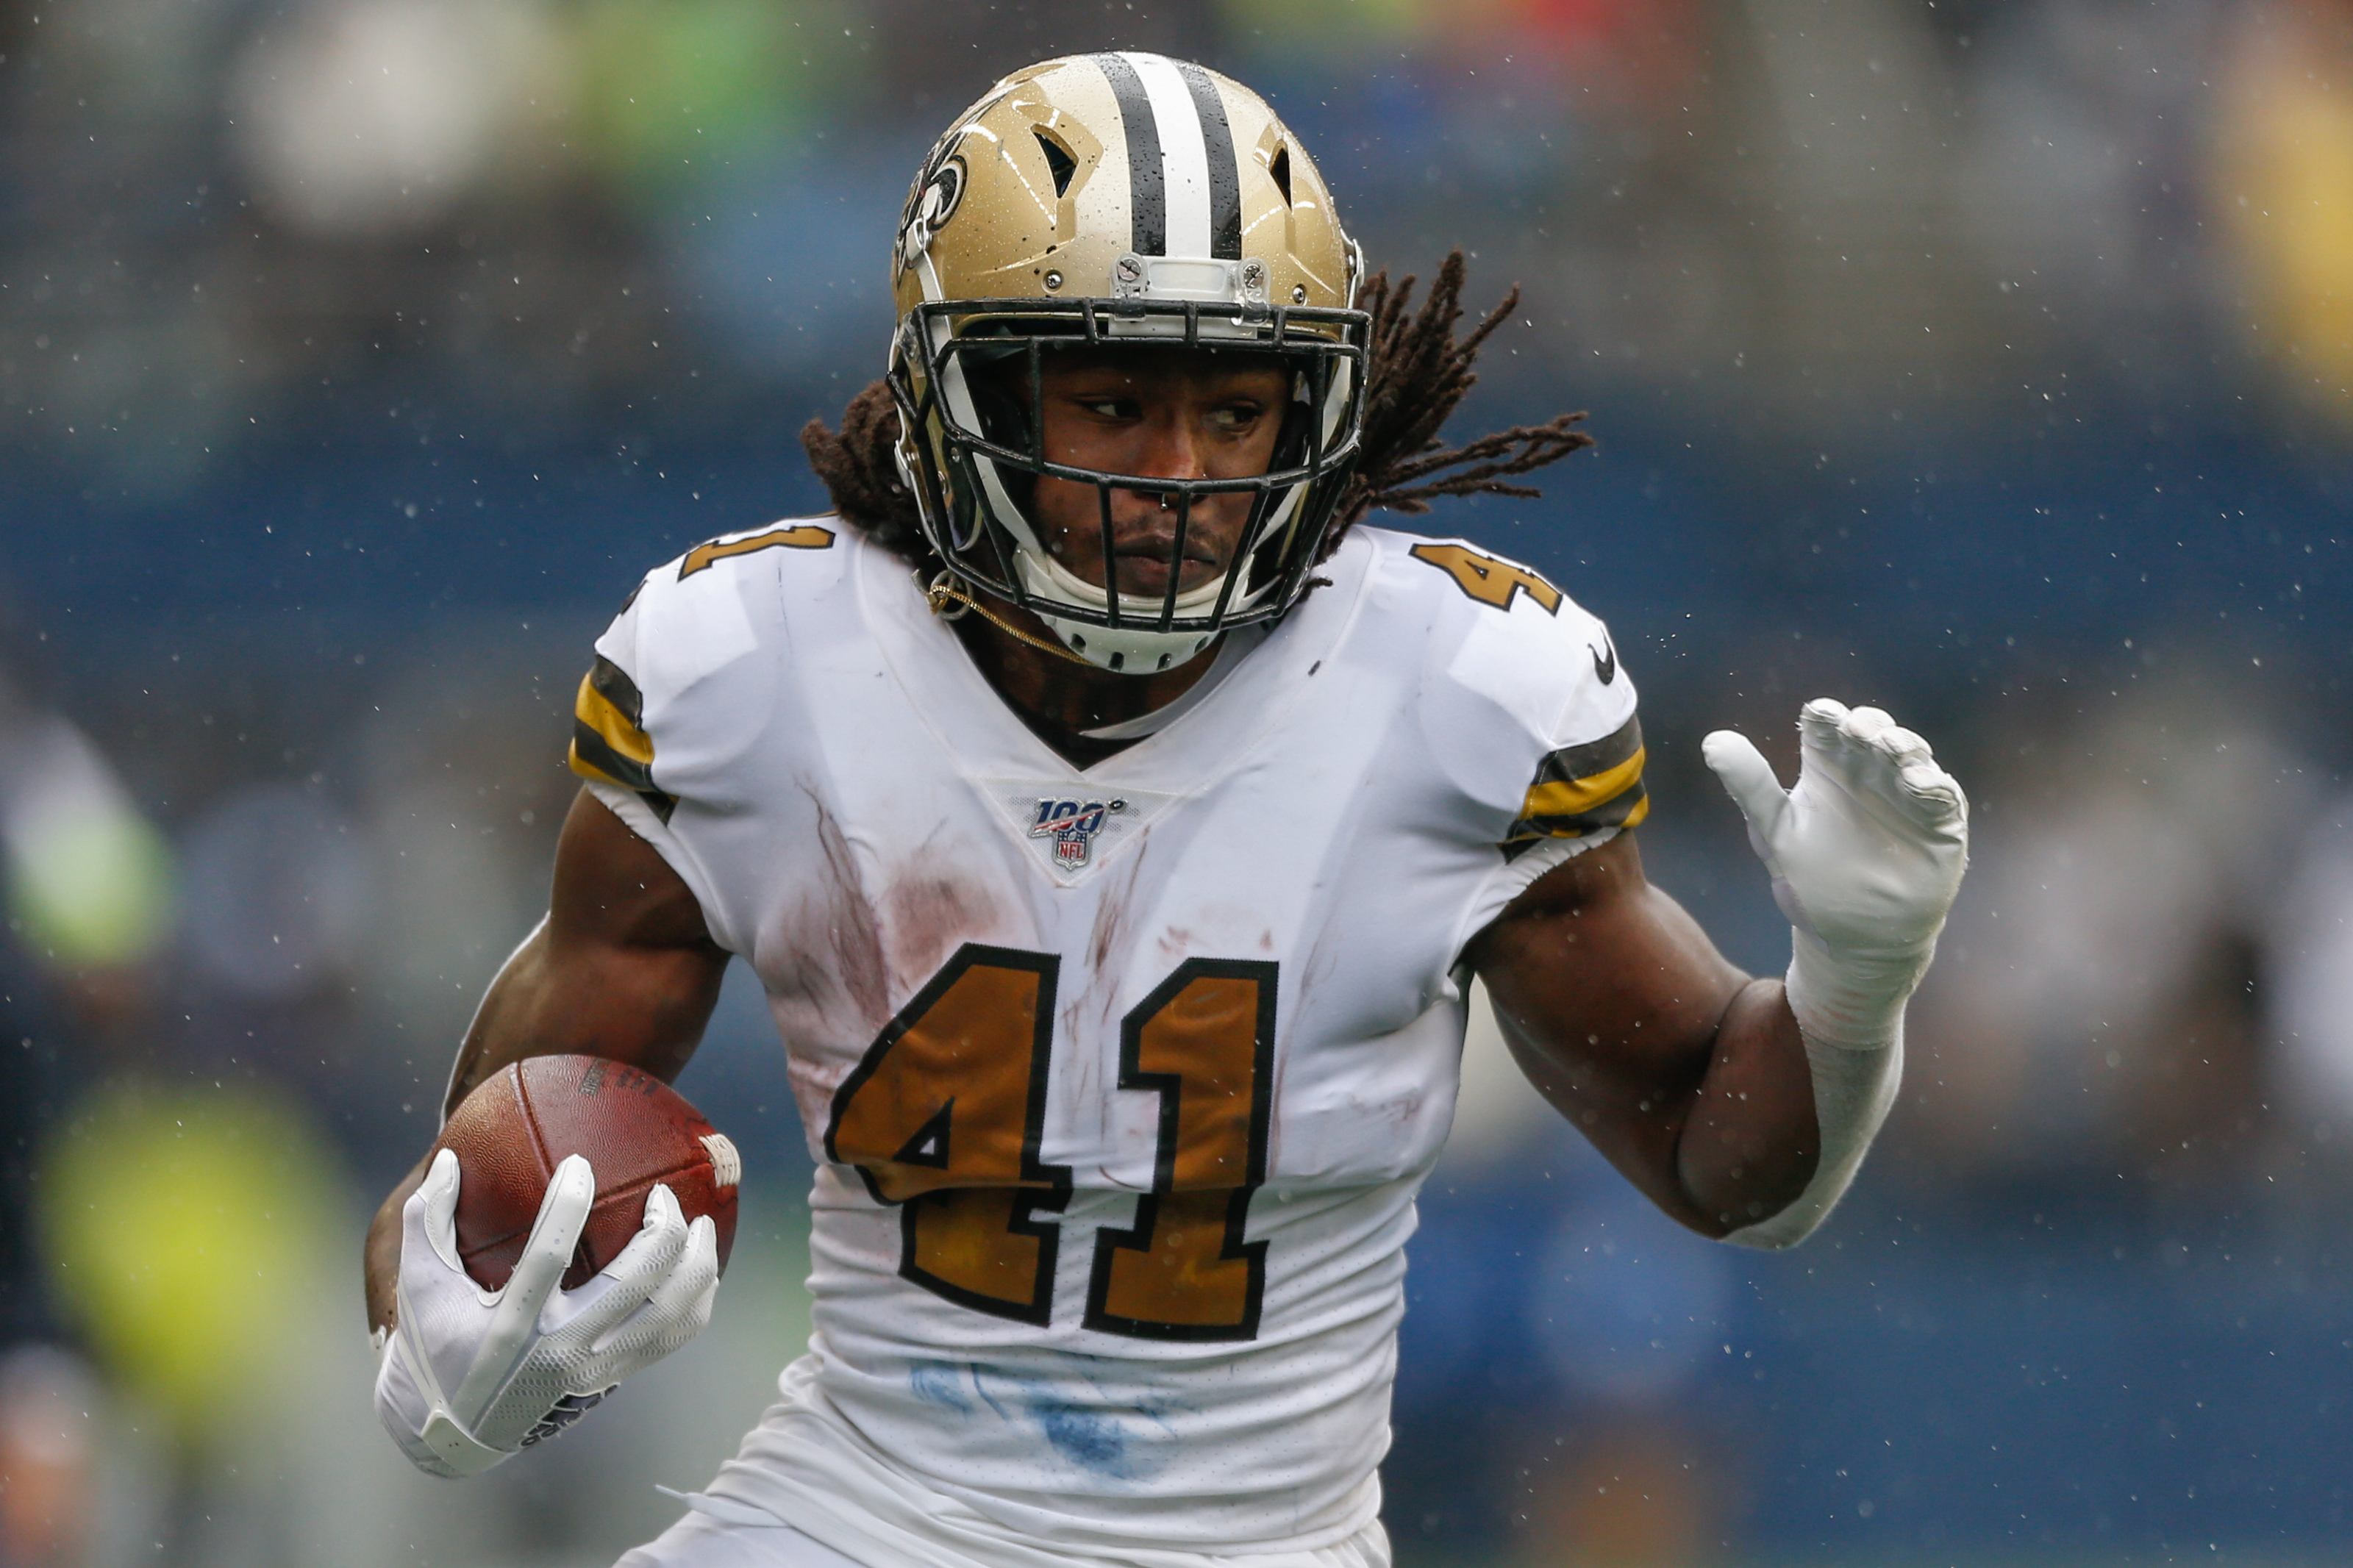 Alvin Kamara is going to provide a real problem for the KC Chiefs